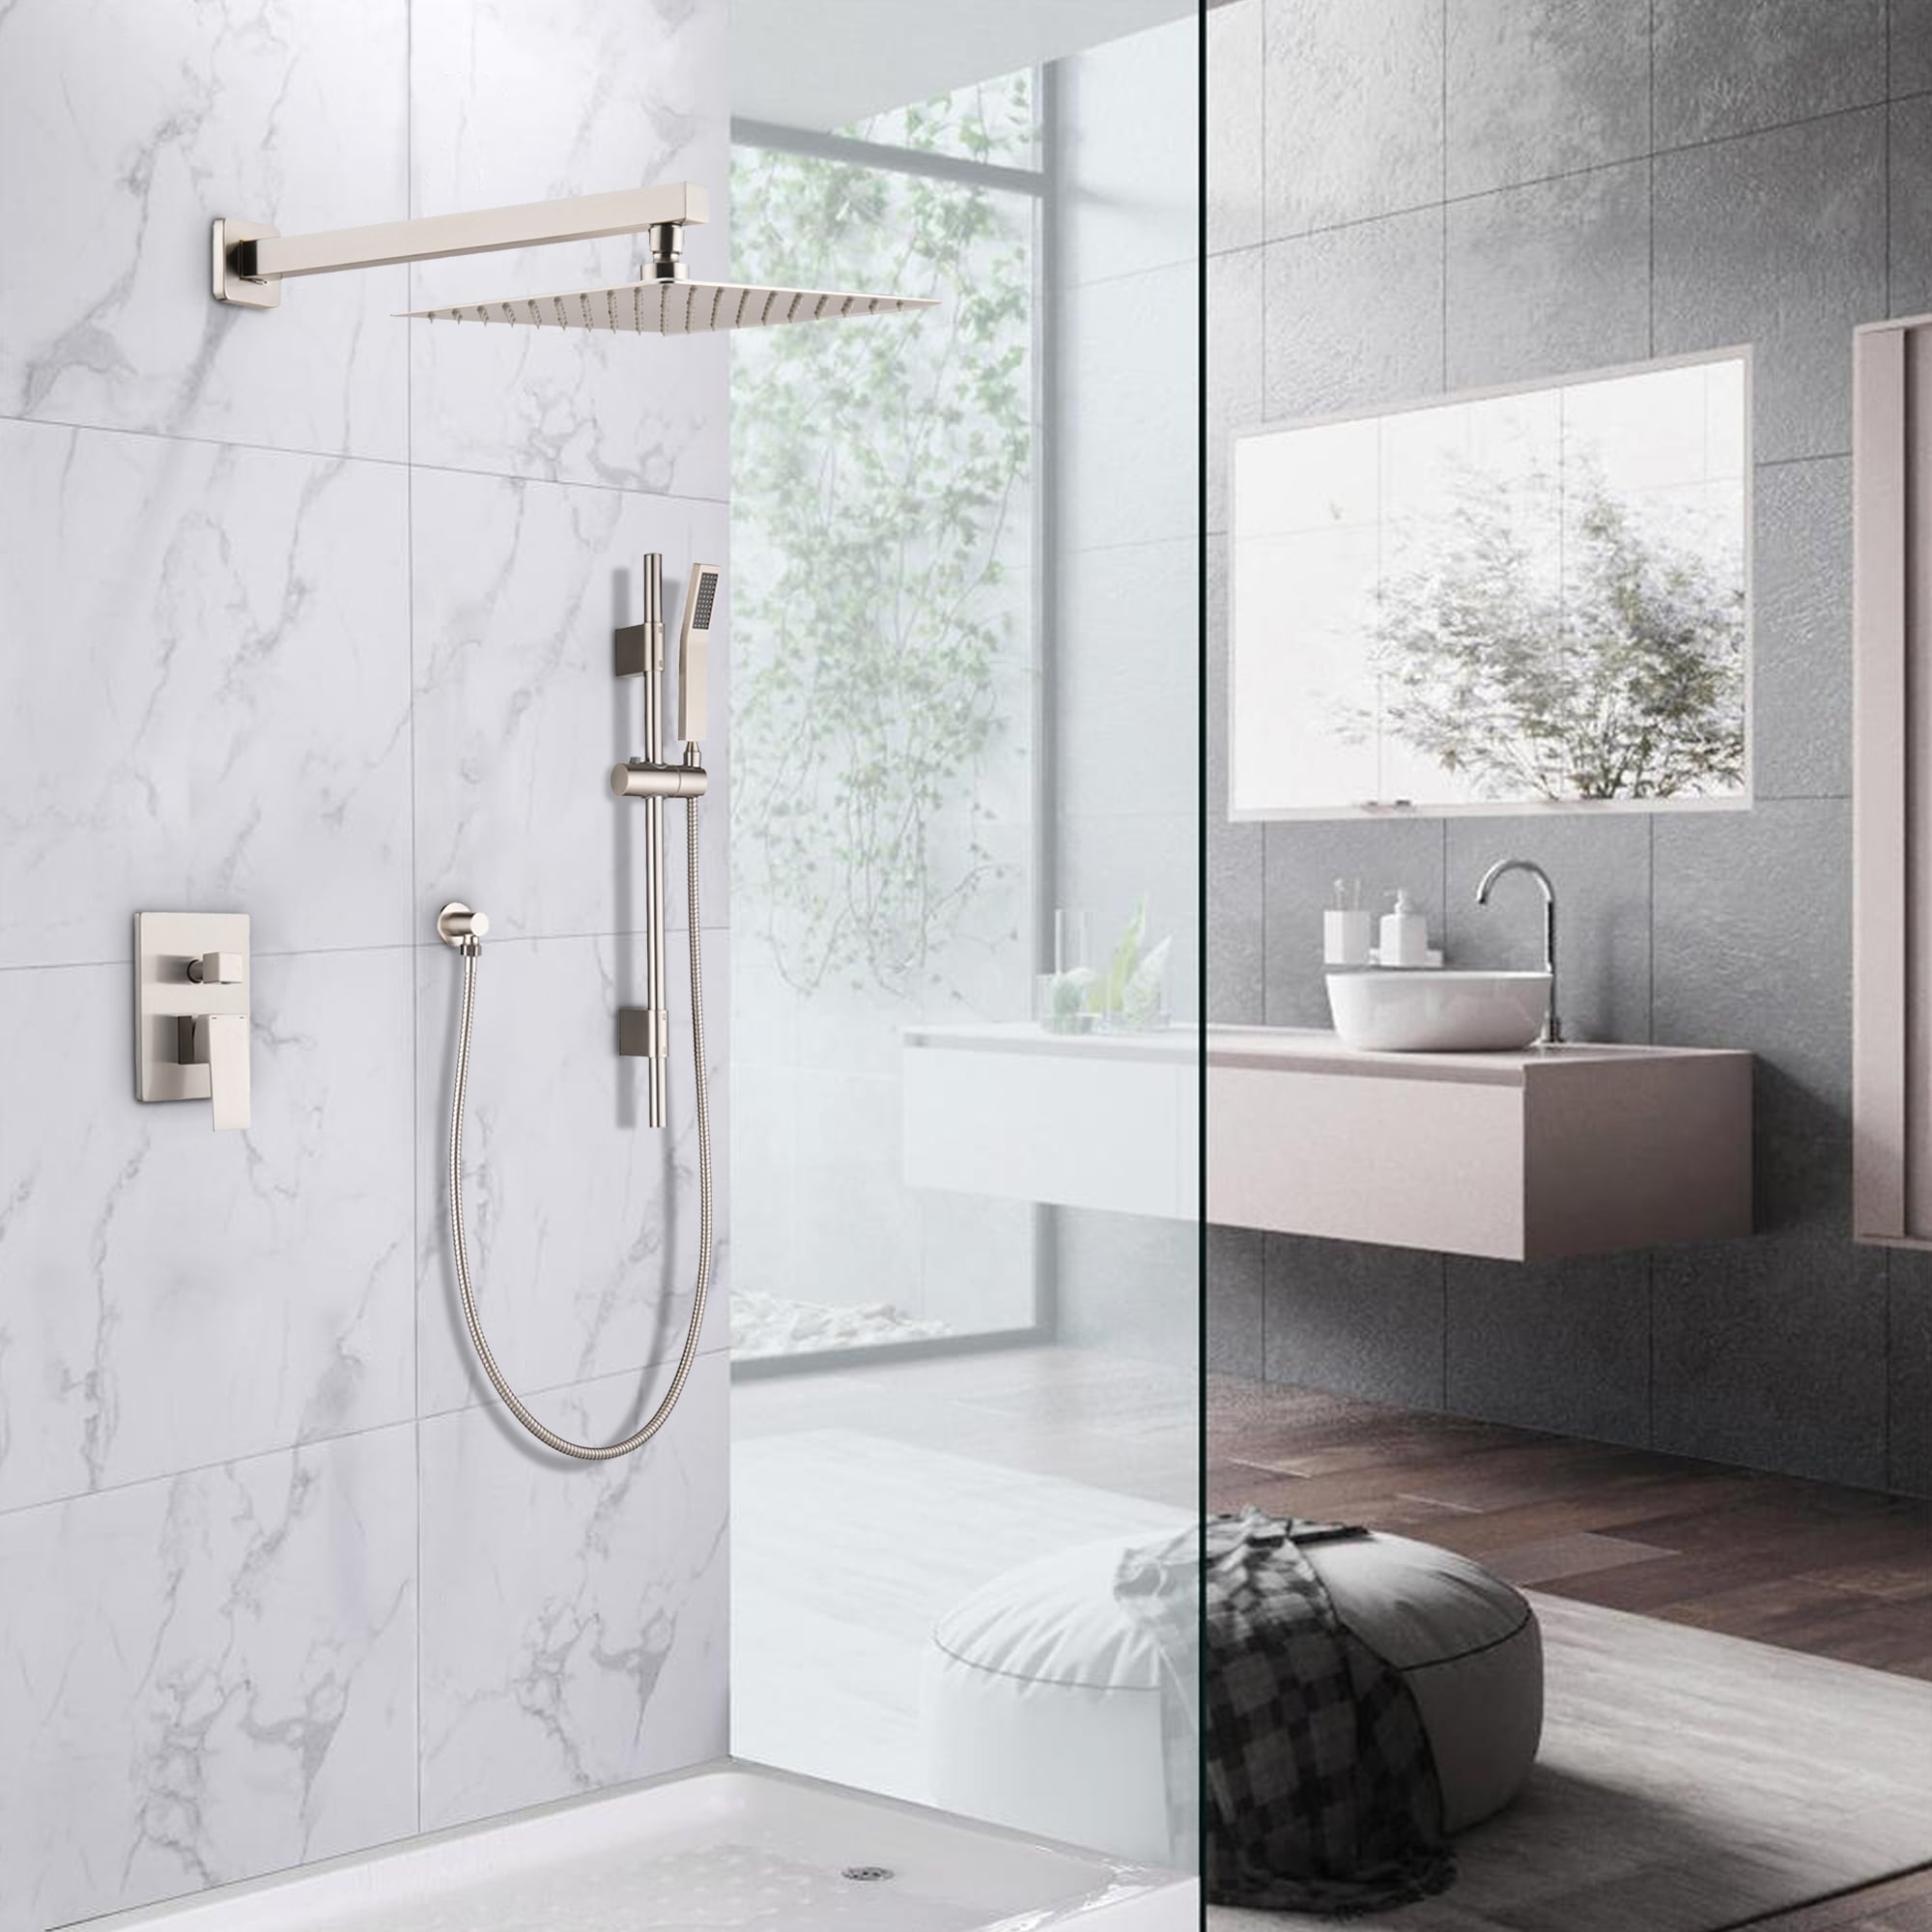 https://ak1.ostkcdn.com/images/products/is/images/direct/b822f73041506875163ef6c32a7e445cc29bccff/Shower-System-with-Shower-Head-Wall-Mounted-Shower-Set.jpg